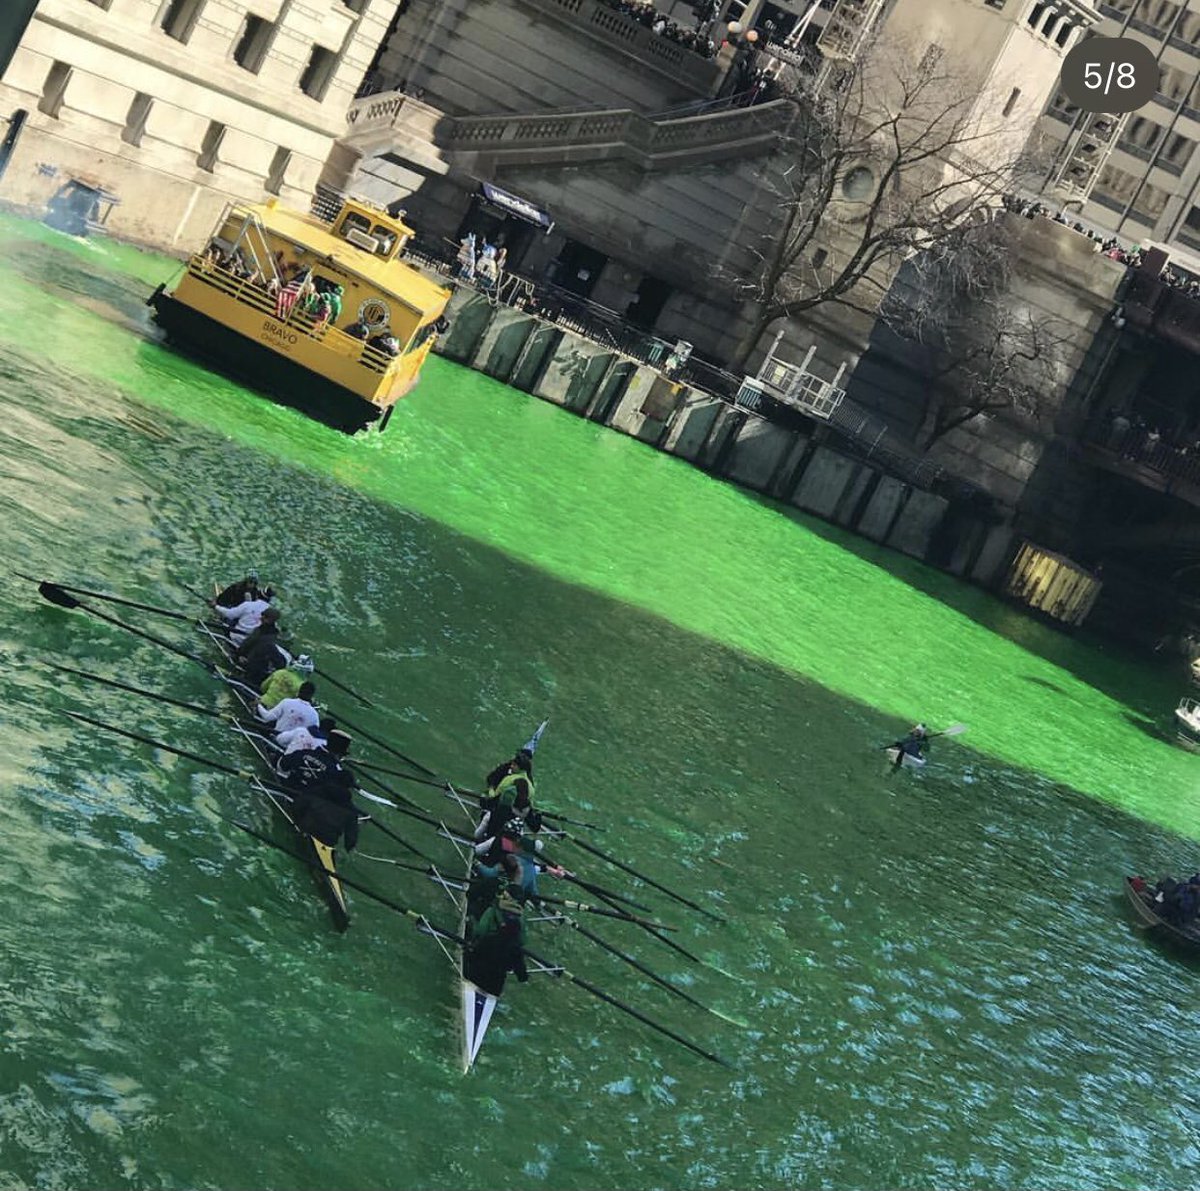 Happy St. Patrick’s Day — Chicago River Dyed Green today.
The photos were taken in 2019
#Ireland #Chicago #chicagoriver #StPatrickDay